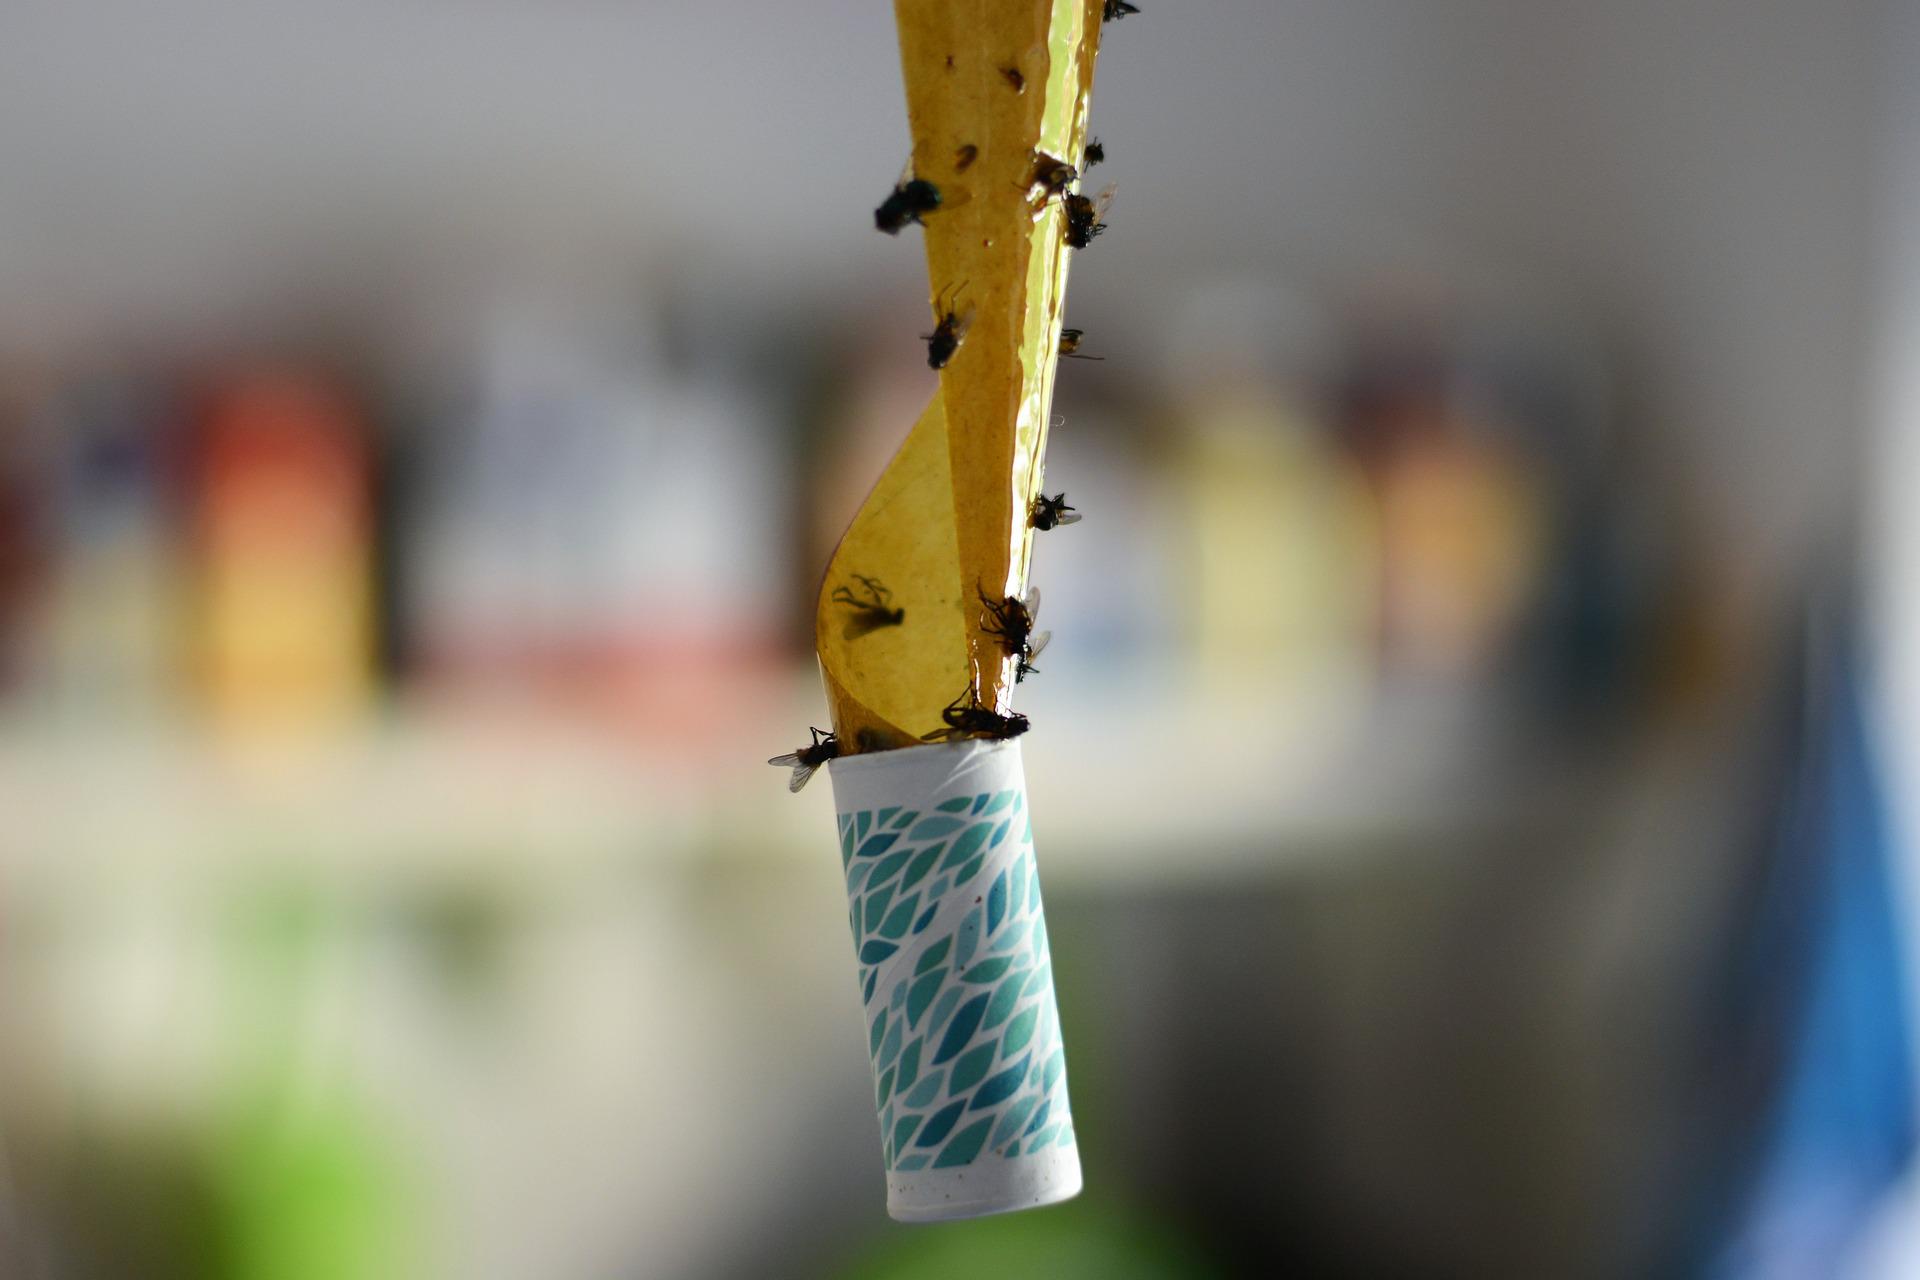 Fly tape covered with flies